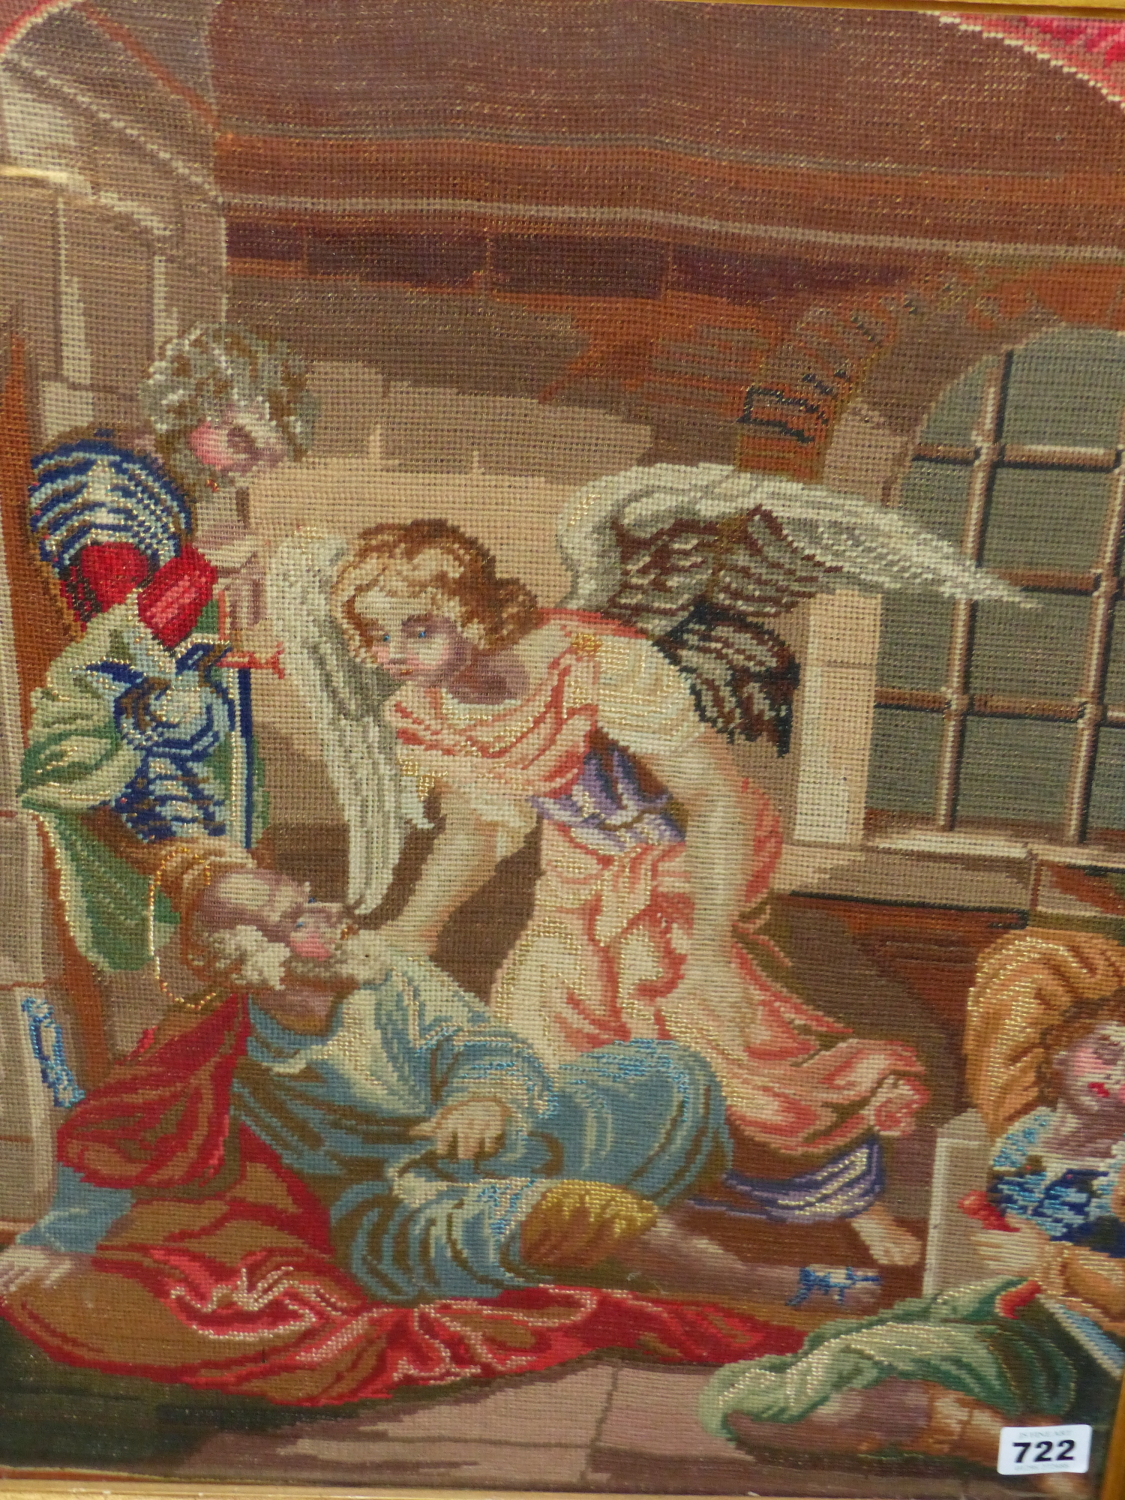 A VICTORIAN NEEDLEPOINT PANEL OF AN ANGEL AND OTHER FIGURES WITHIN AN ARCHITECTURAL SETTING. 54 x